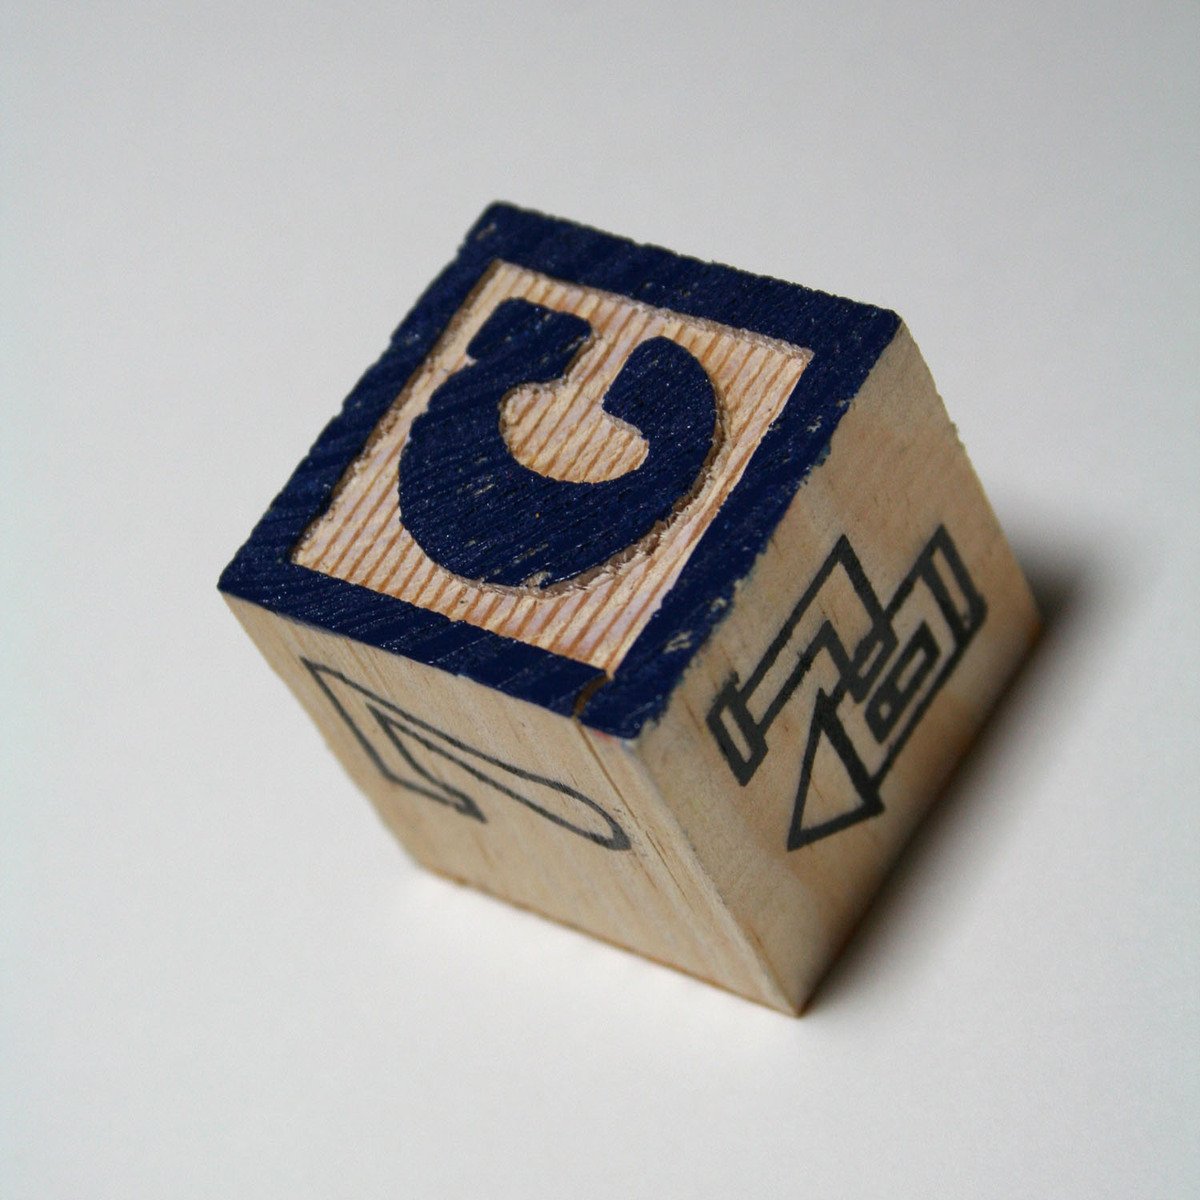 a rubber dice that has an abstract design on it